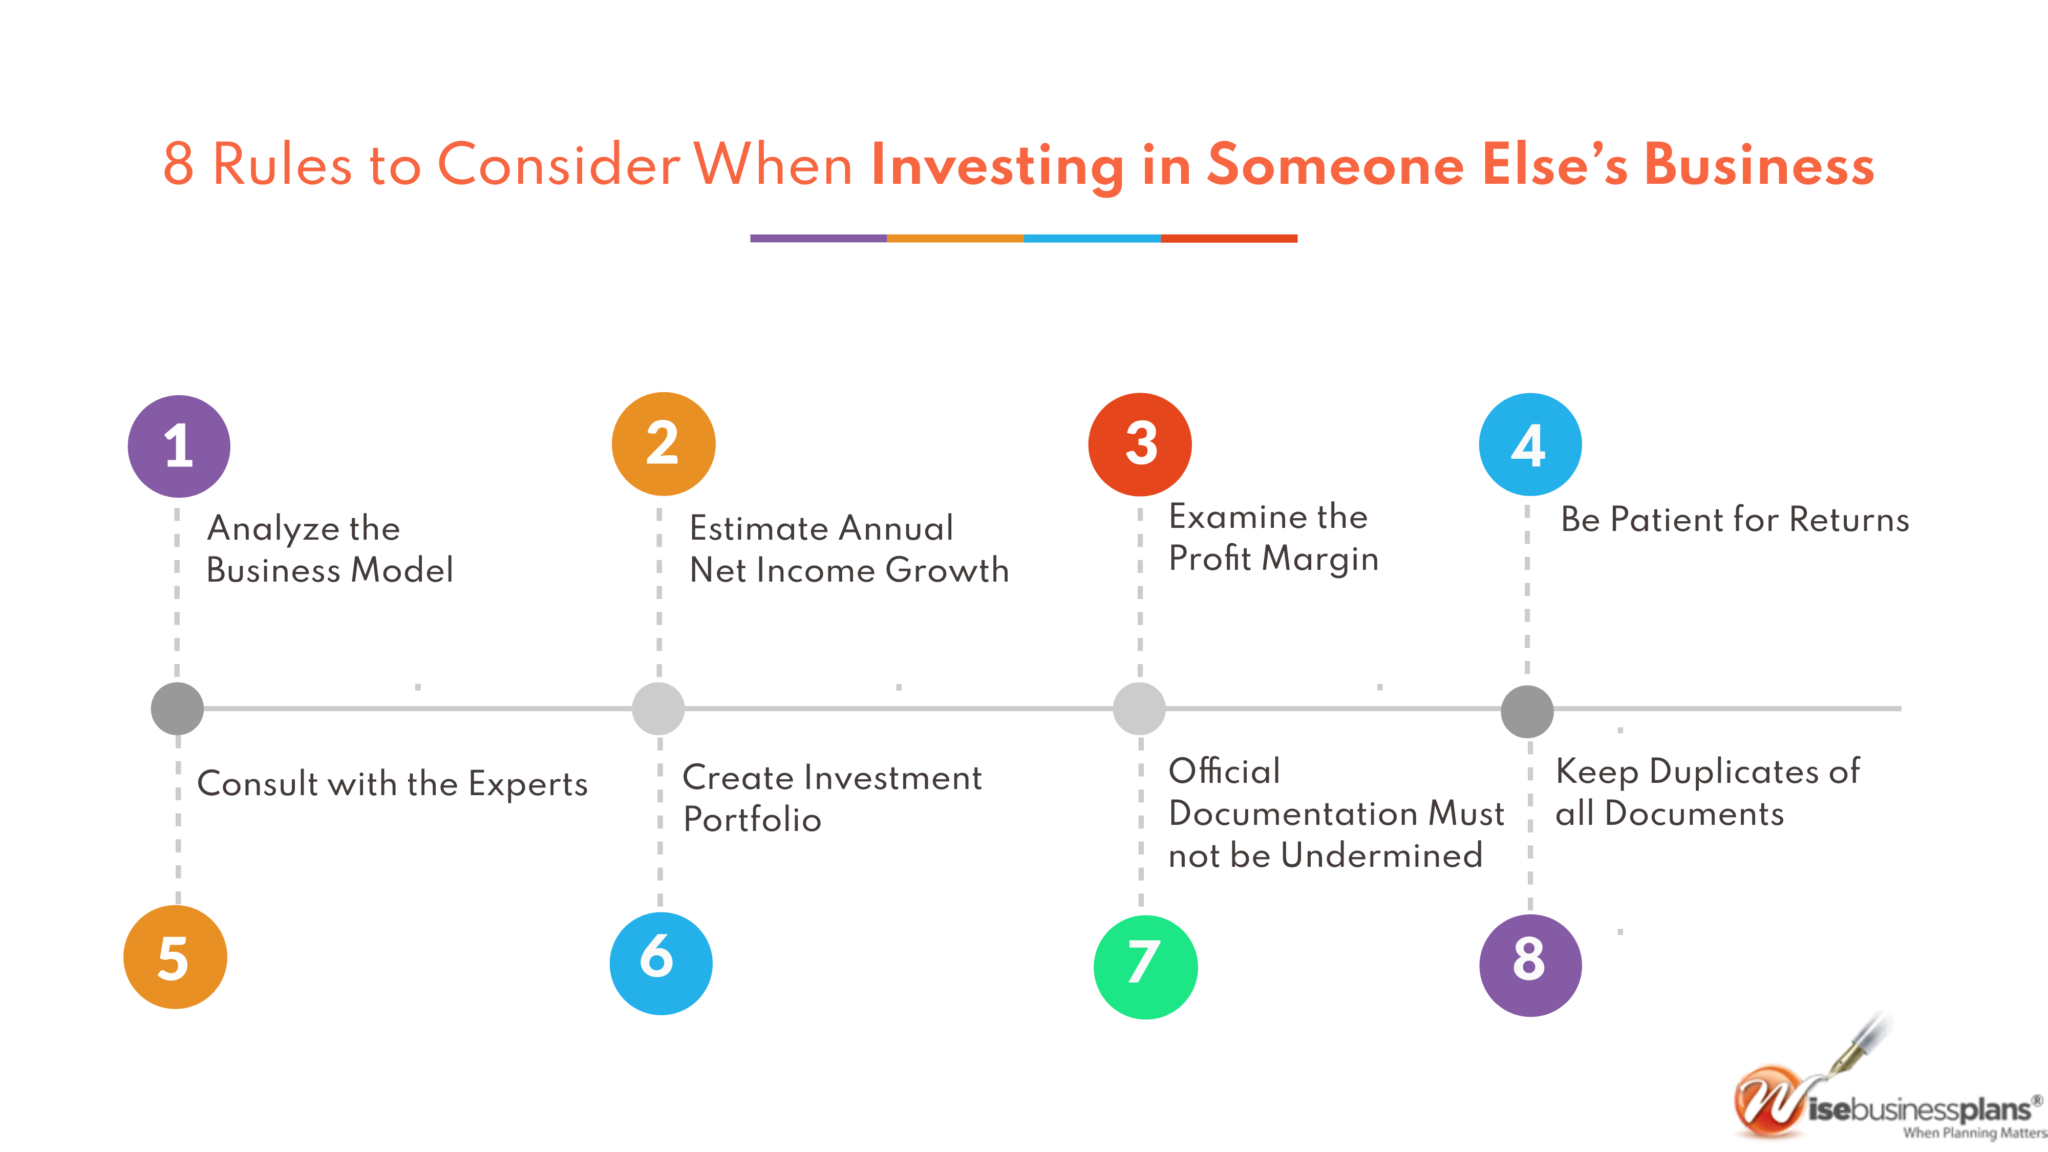 When Investing in Someone Else’s Business